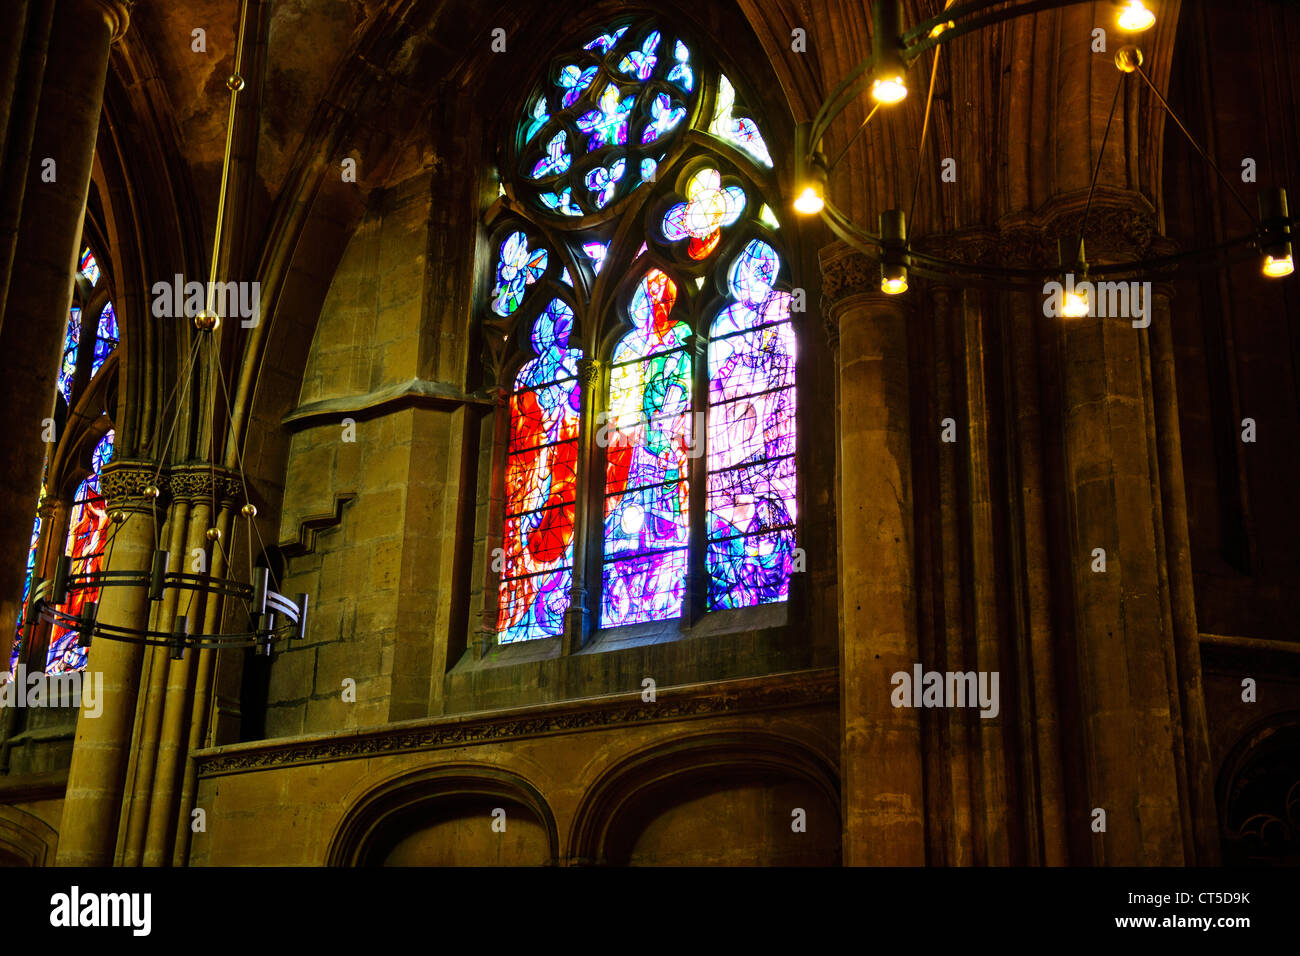 Cathédrale Saint Étienne de Metz,Cathedral of Metz,It Has the 10th highest naves in the world and the most stained glass windows Stock Photo